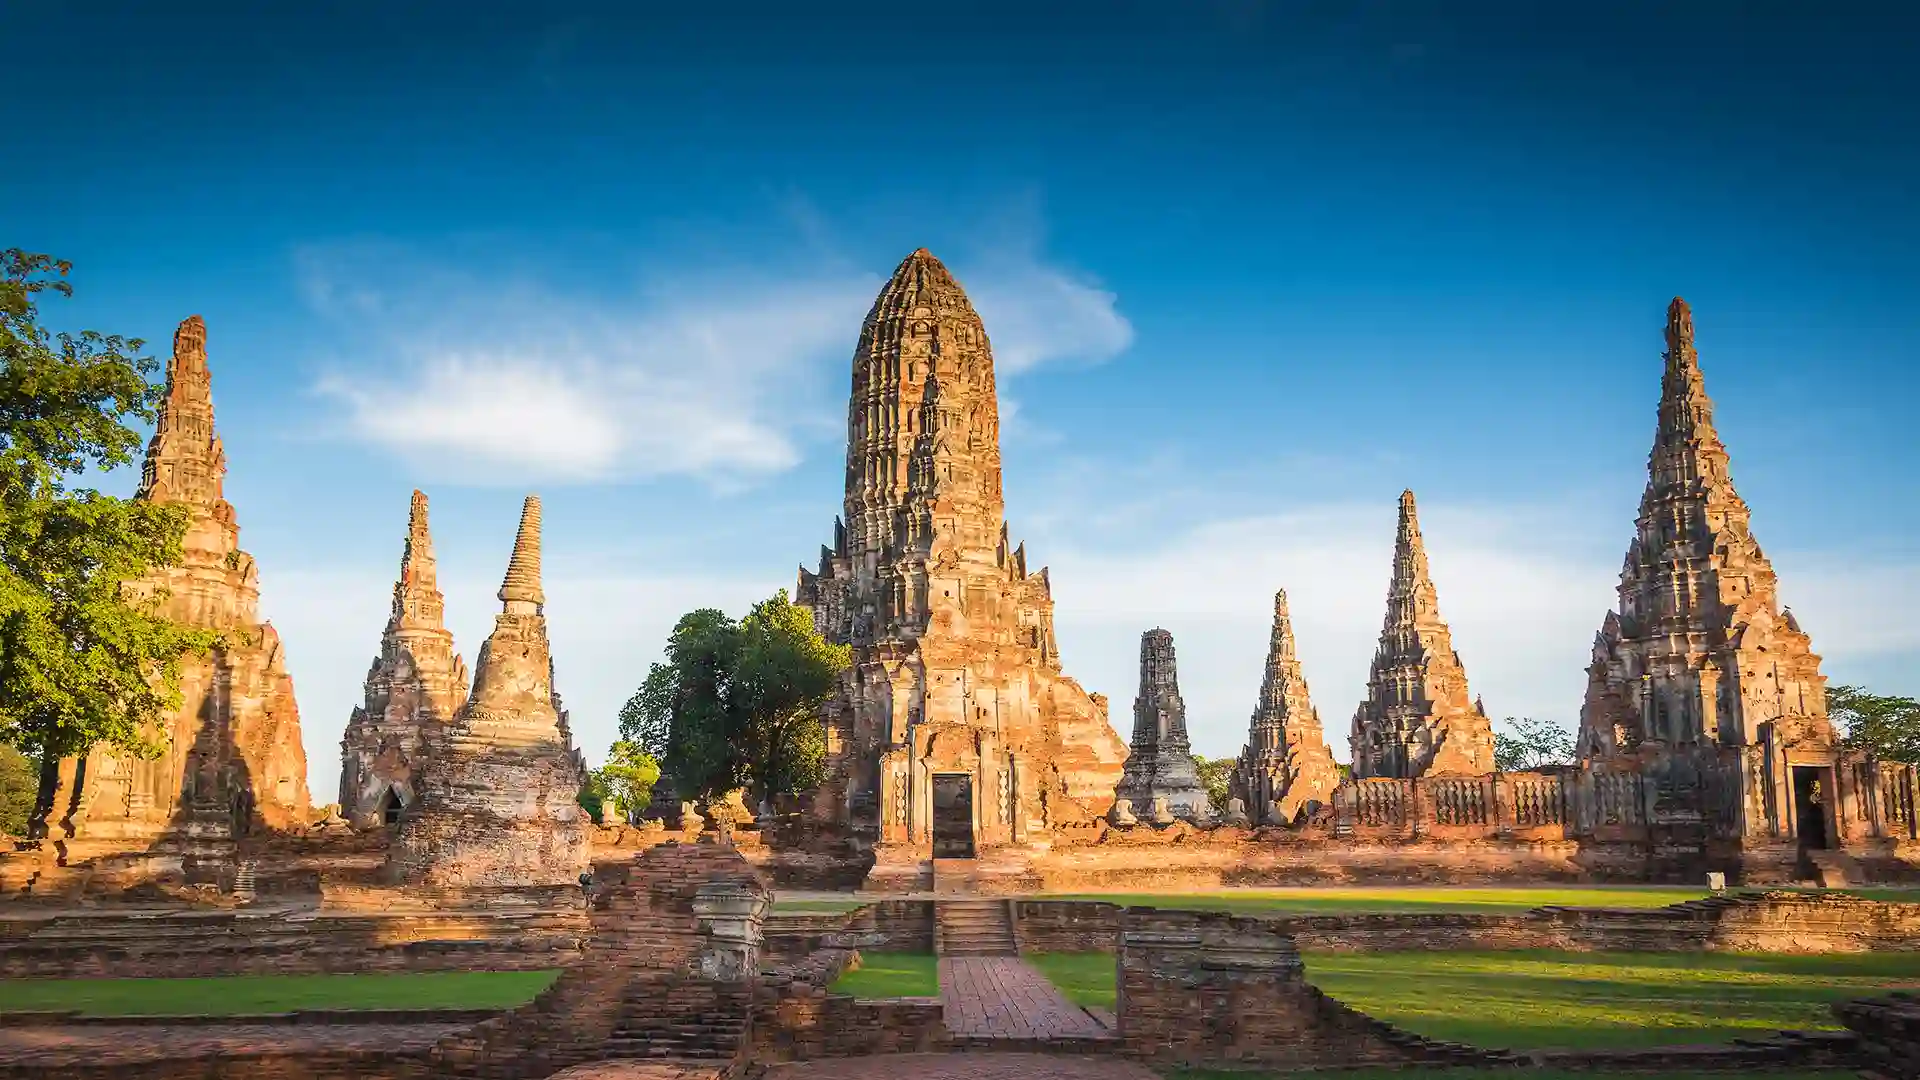 Ancient sites in Ayutthaya, the ancient capital of Thailand.